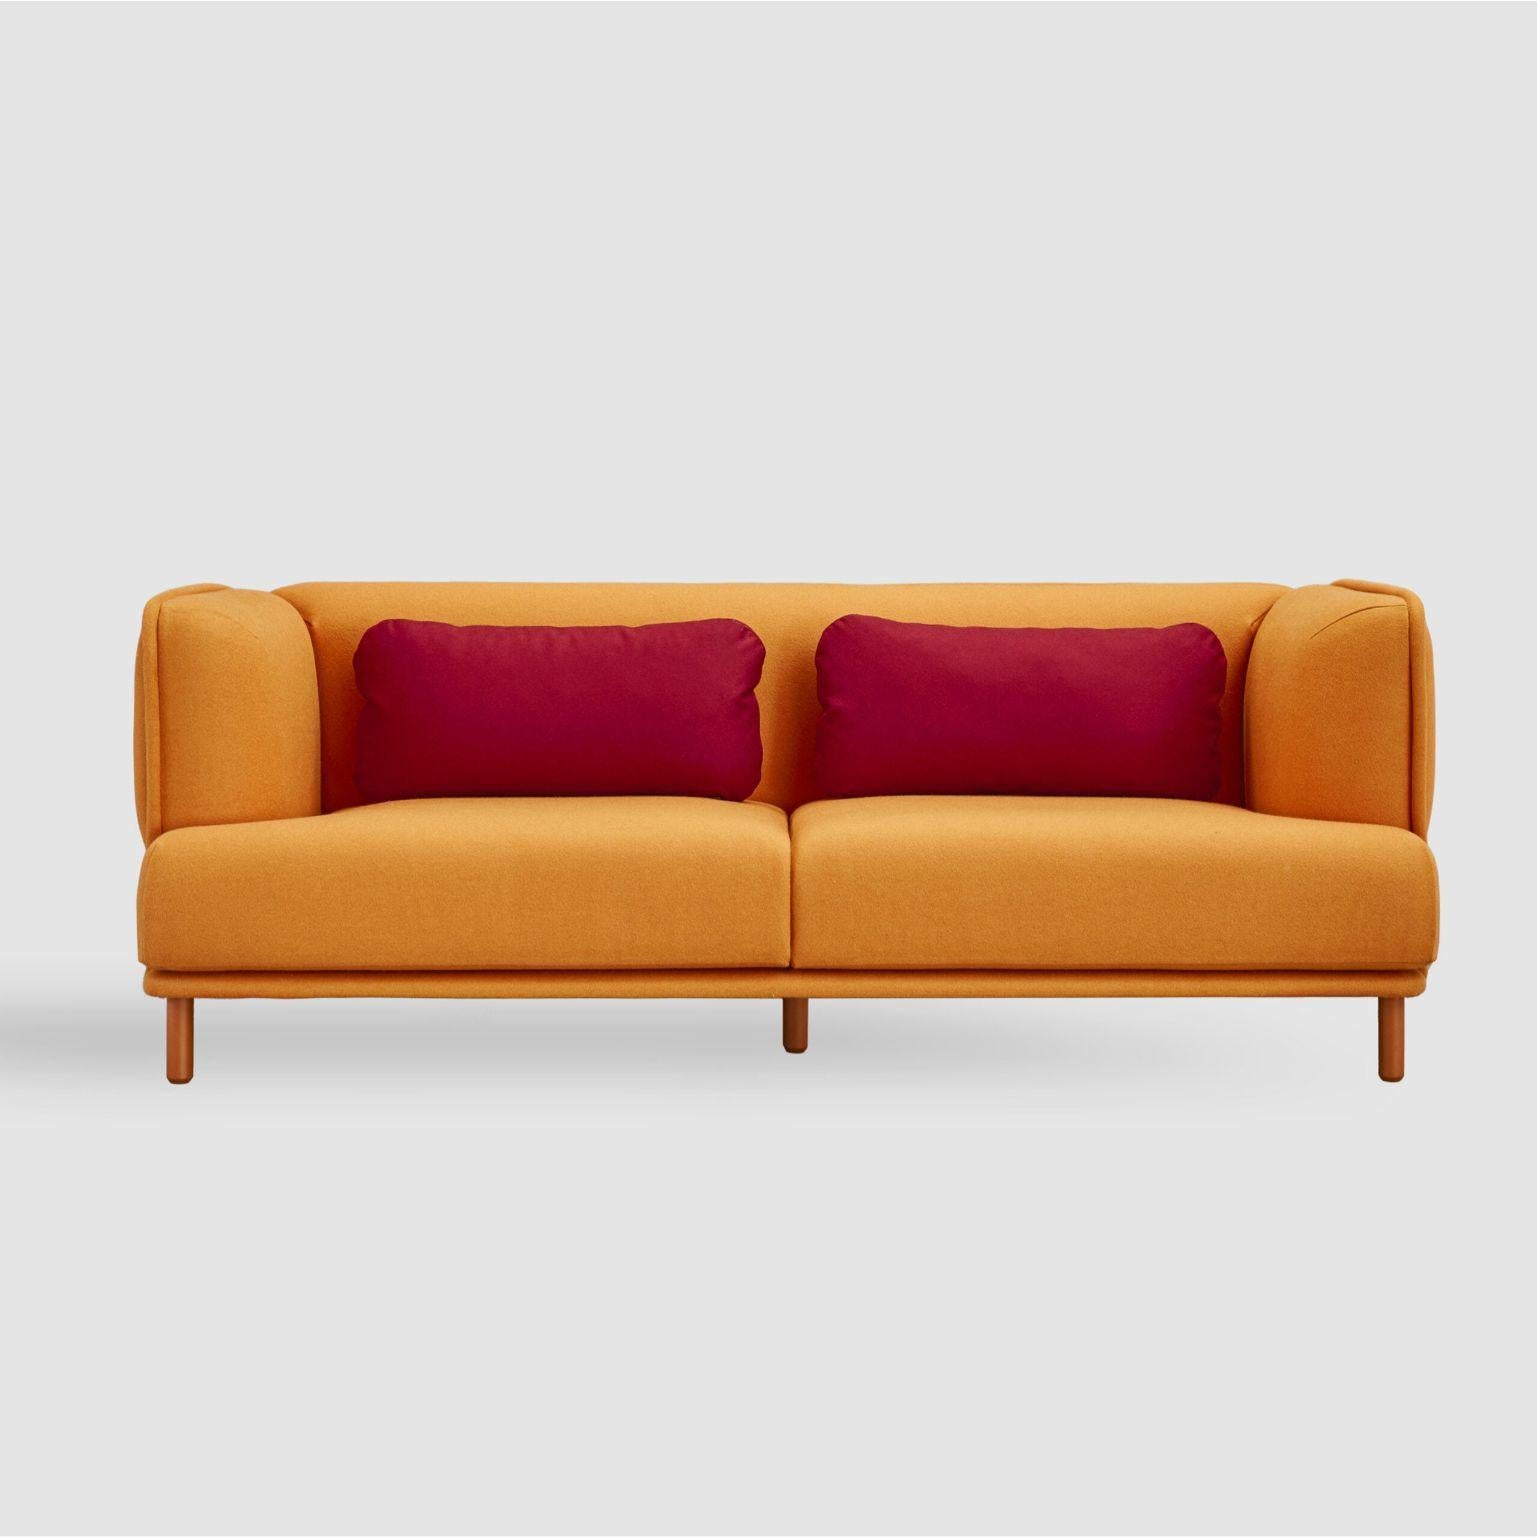 Hug sofa, 3 seaters by Pepe Albargues
Dimensions: W202, D95, H73, Seat43
Materials: Pine wood structure reinforced with plywood and tablex
Backrest is 50% goose feather and 50% polyester fibre
Foam CMHR (high resilience and flame retardant) for